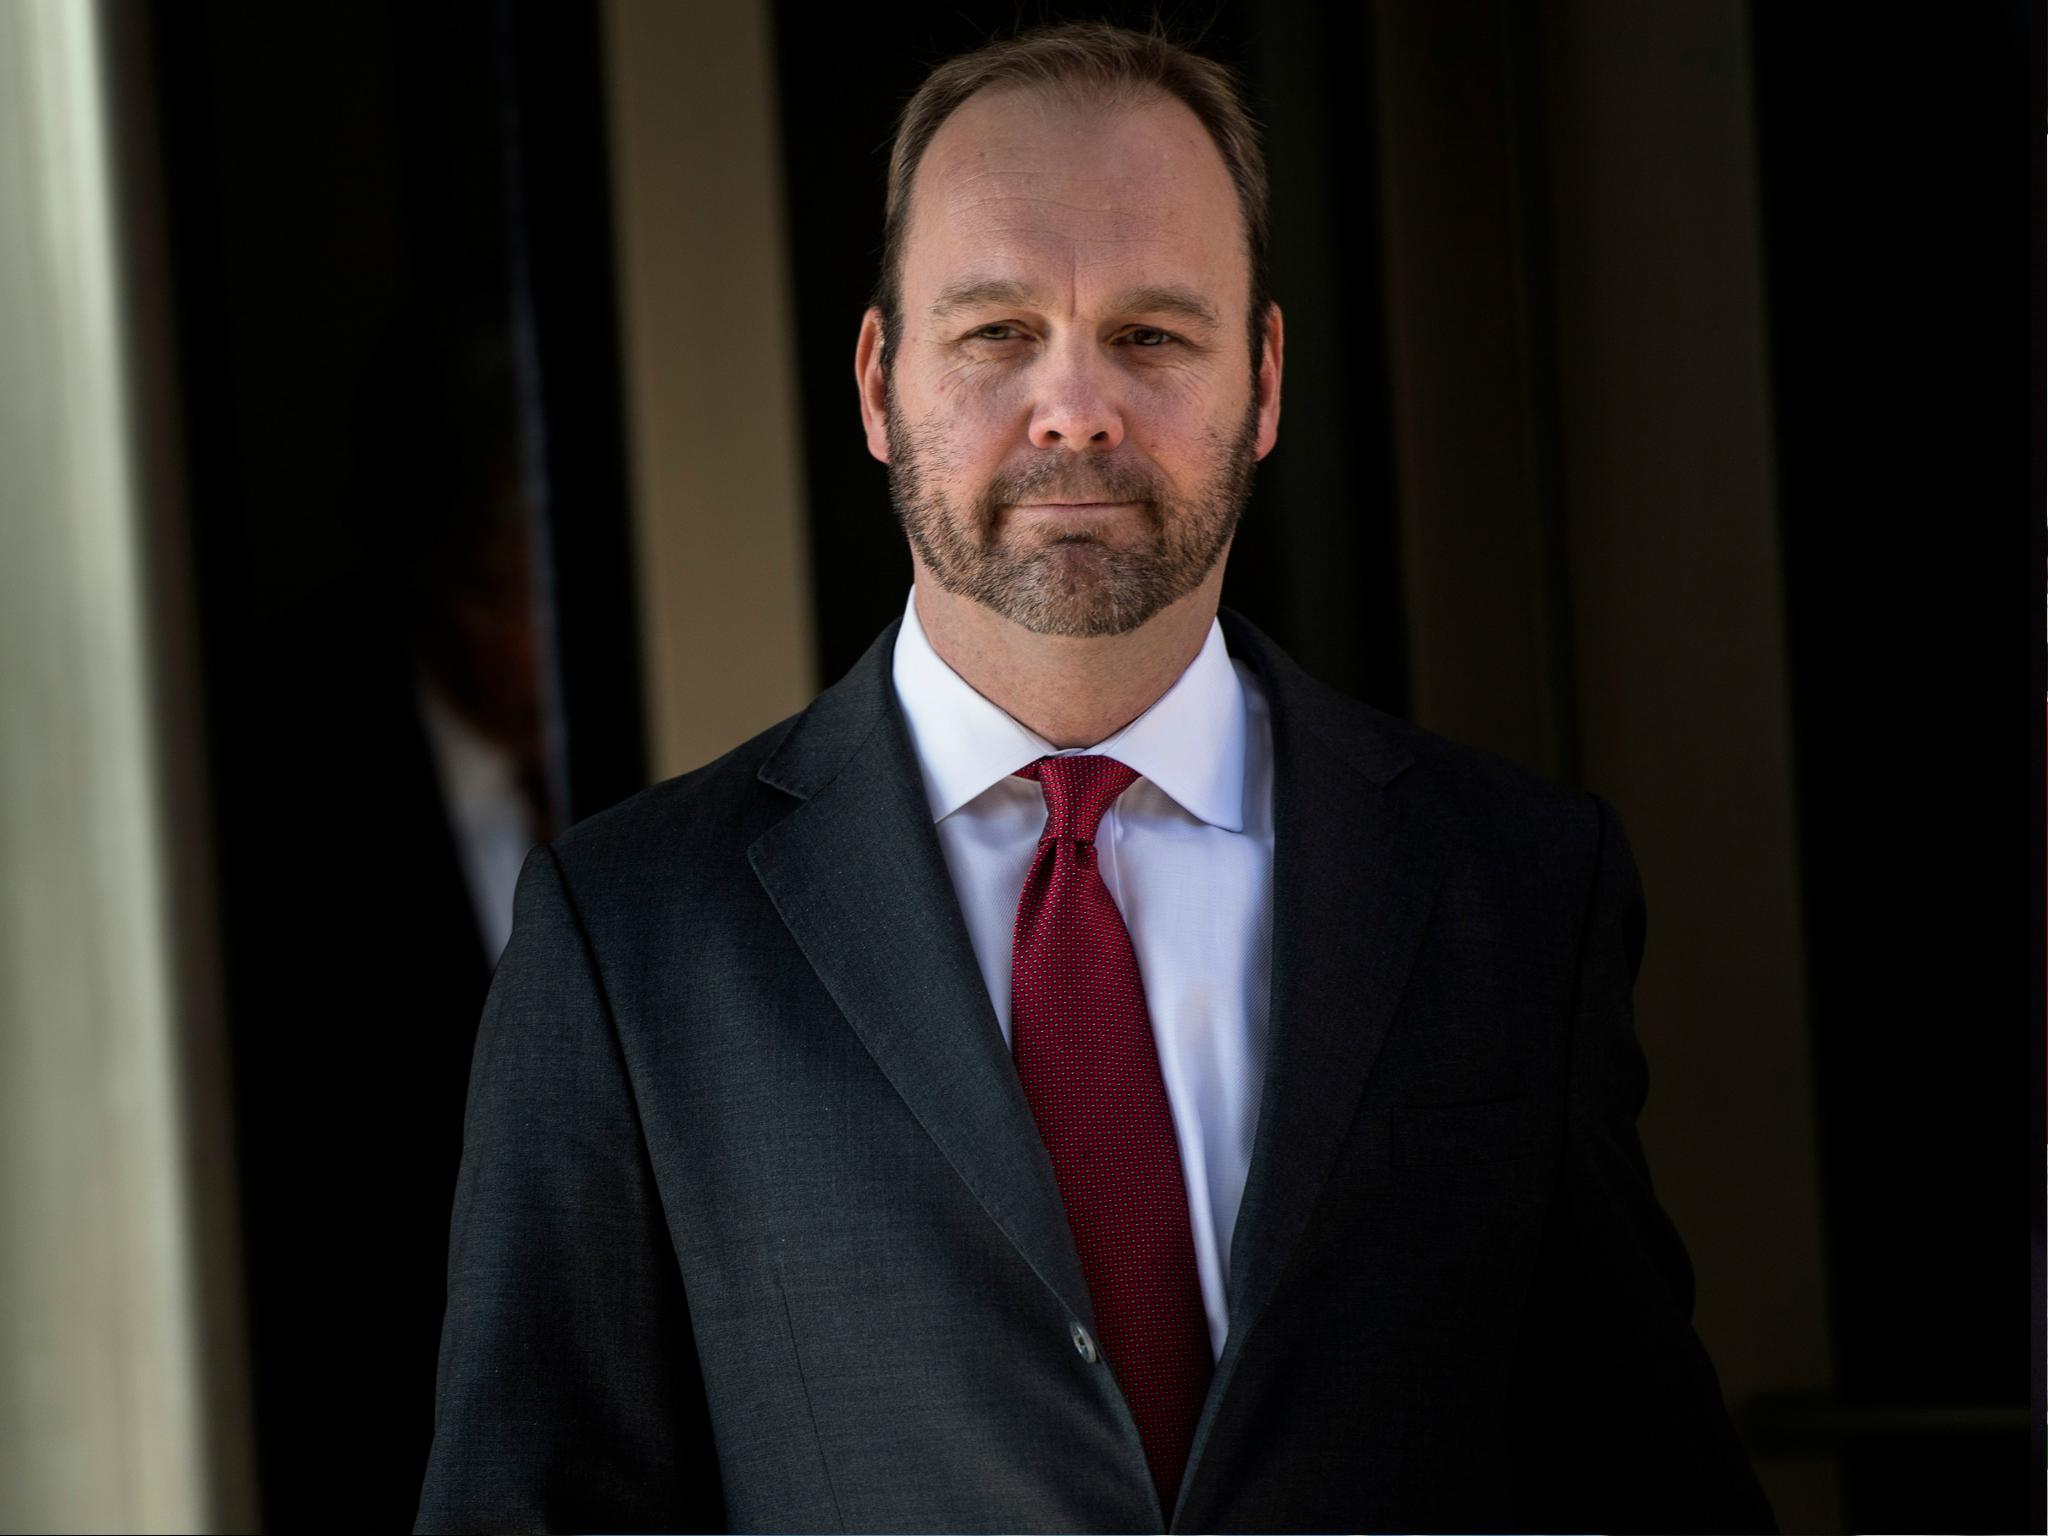 Former Trump campaign official Rick Gates leaves Federal Court on 11 December 2017 in Washington, DC.